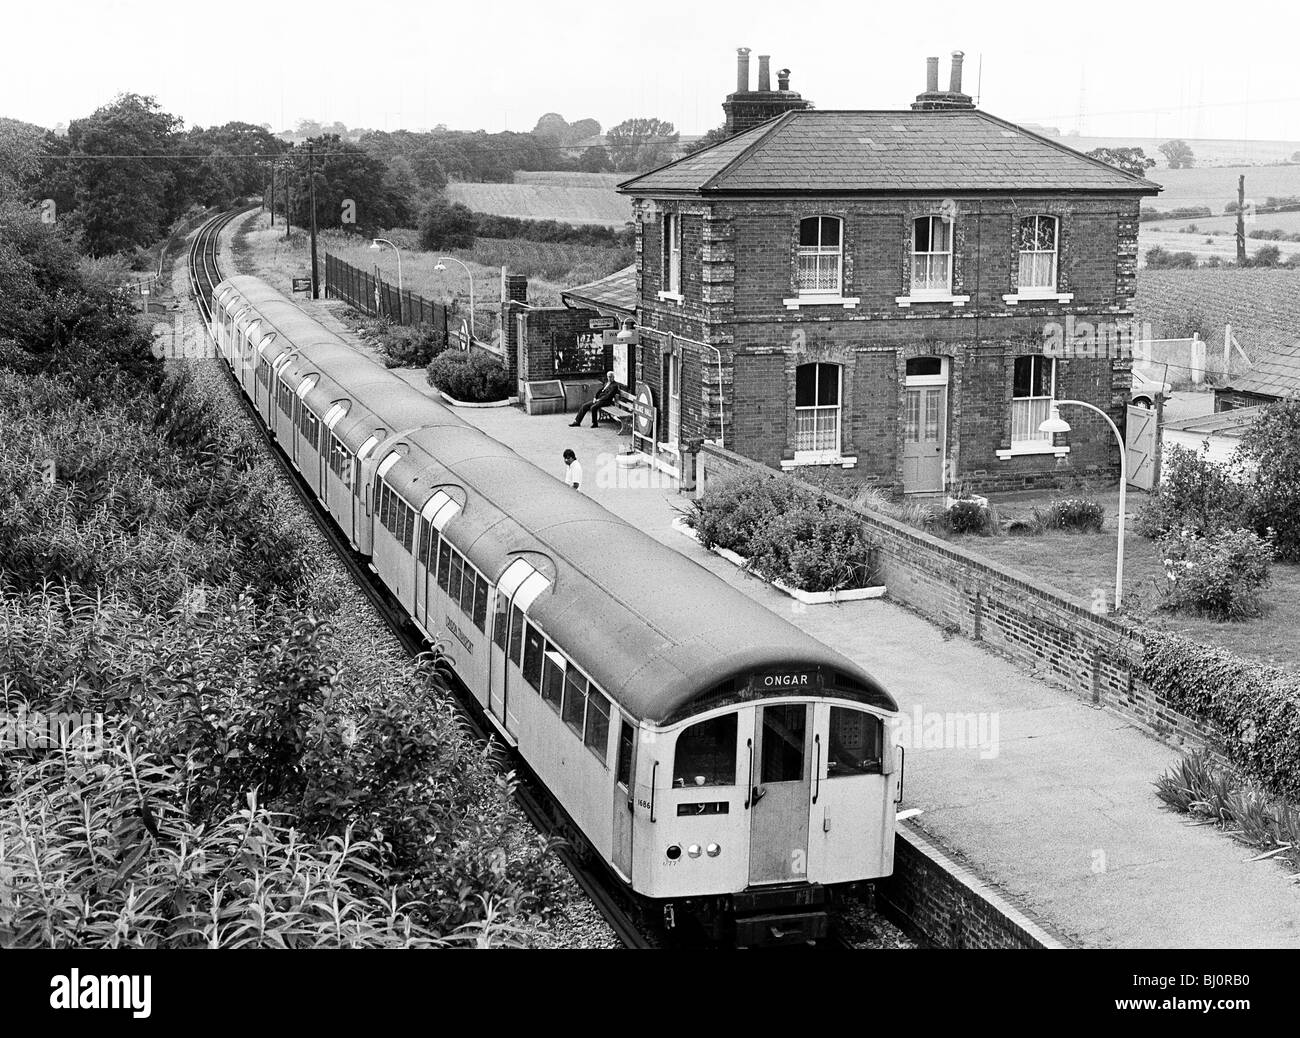 A London Underground train stopping at Blake Hall station on the Epping to Ongar section of the Central Line on 23.9.81. Stock Photo